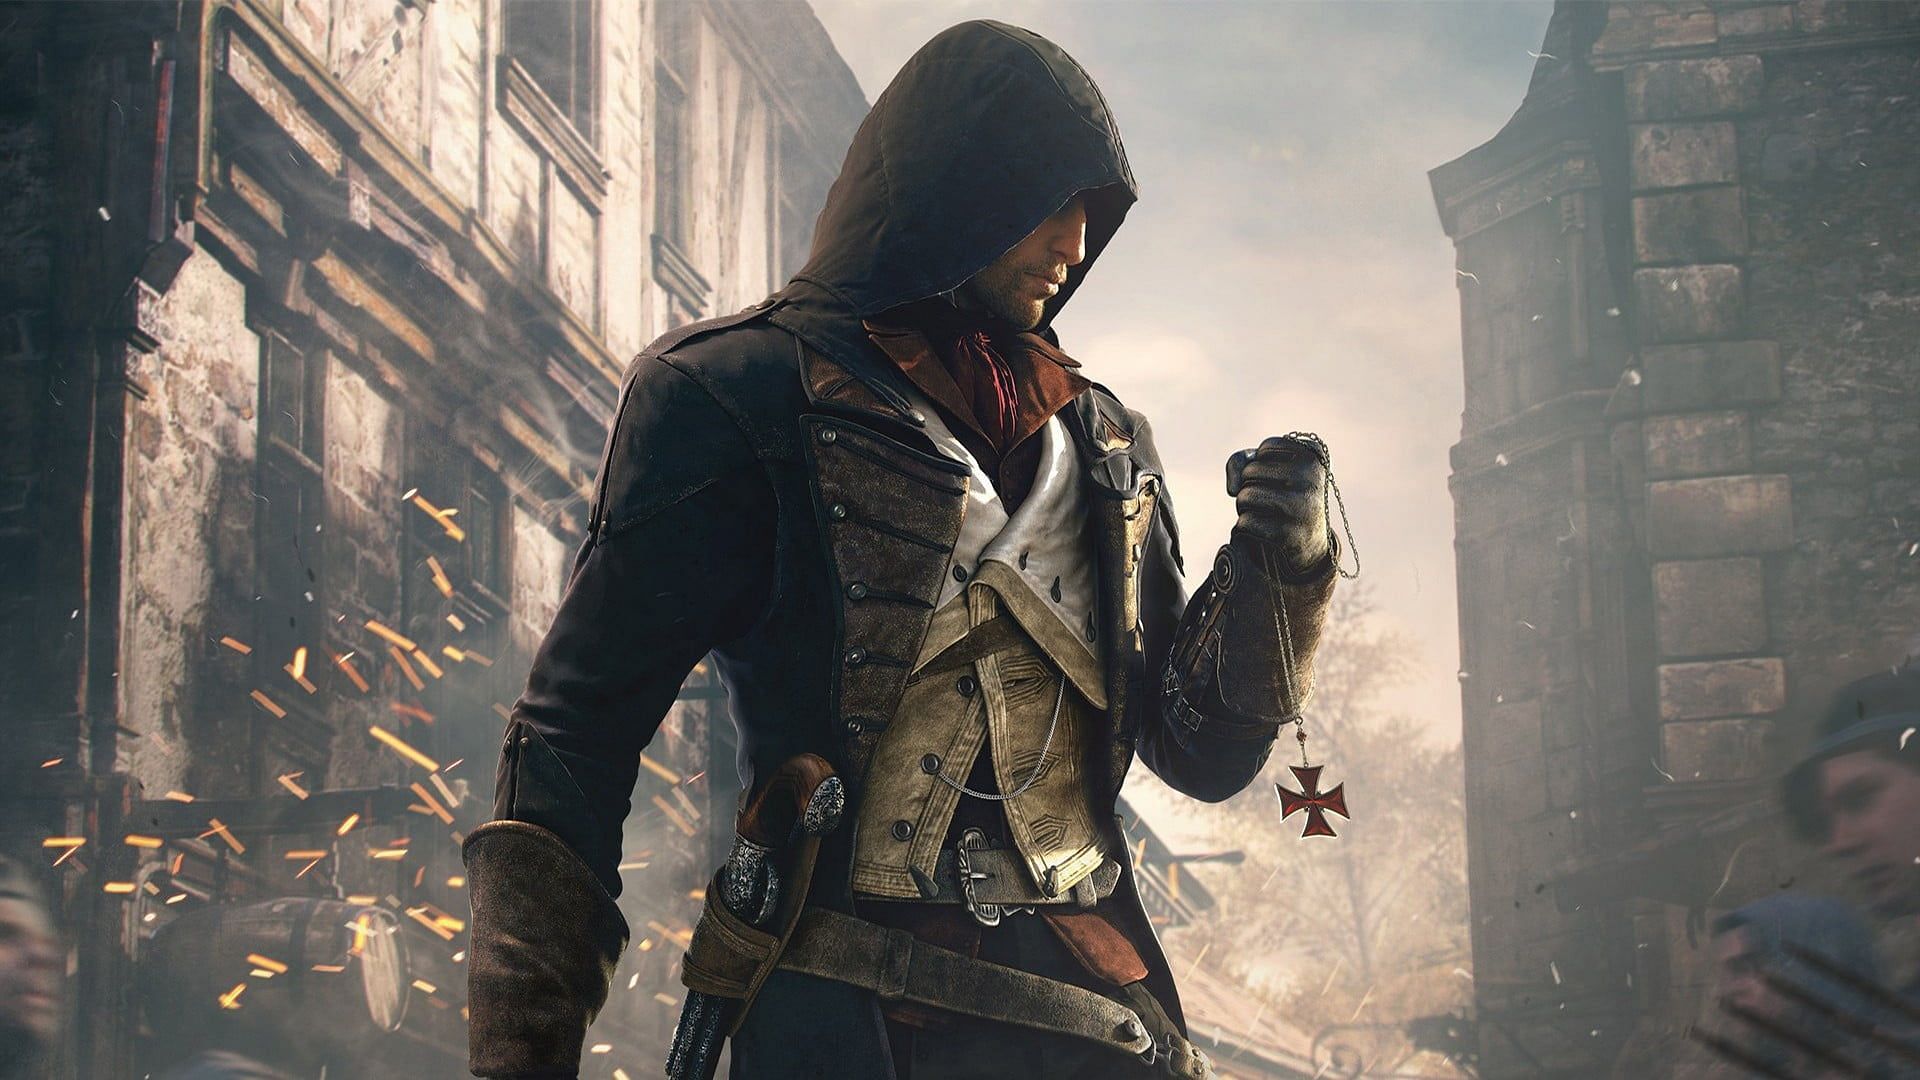 A master Assassin from the Brotherhood in France. (Image via Ubisoft)